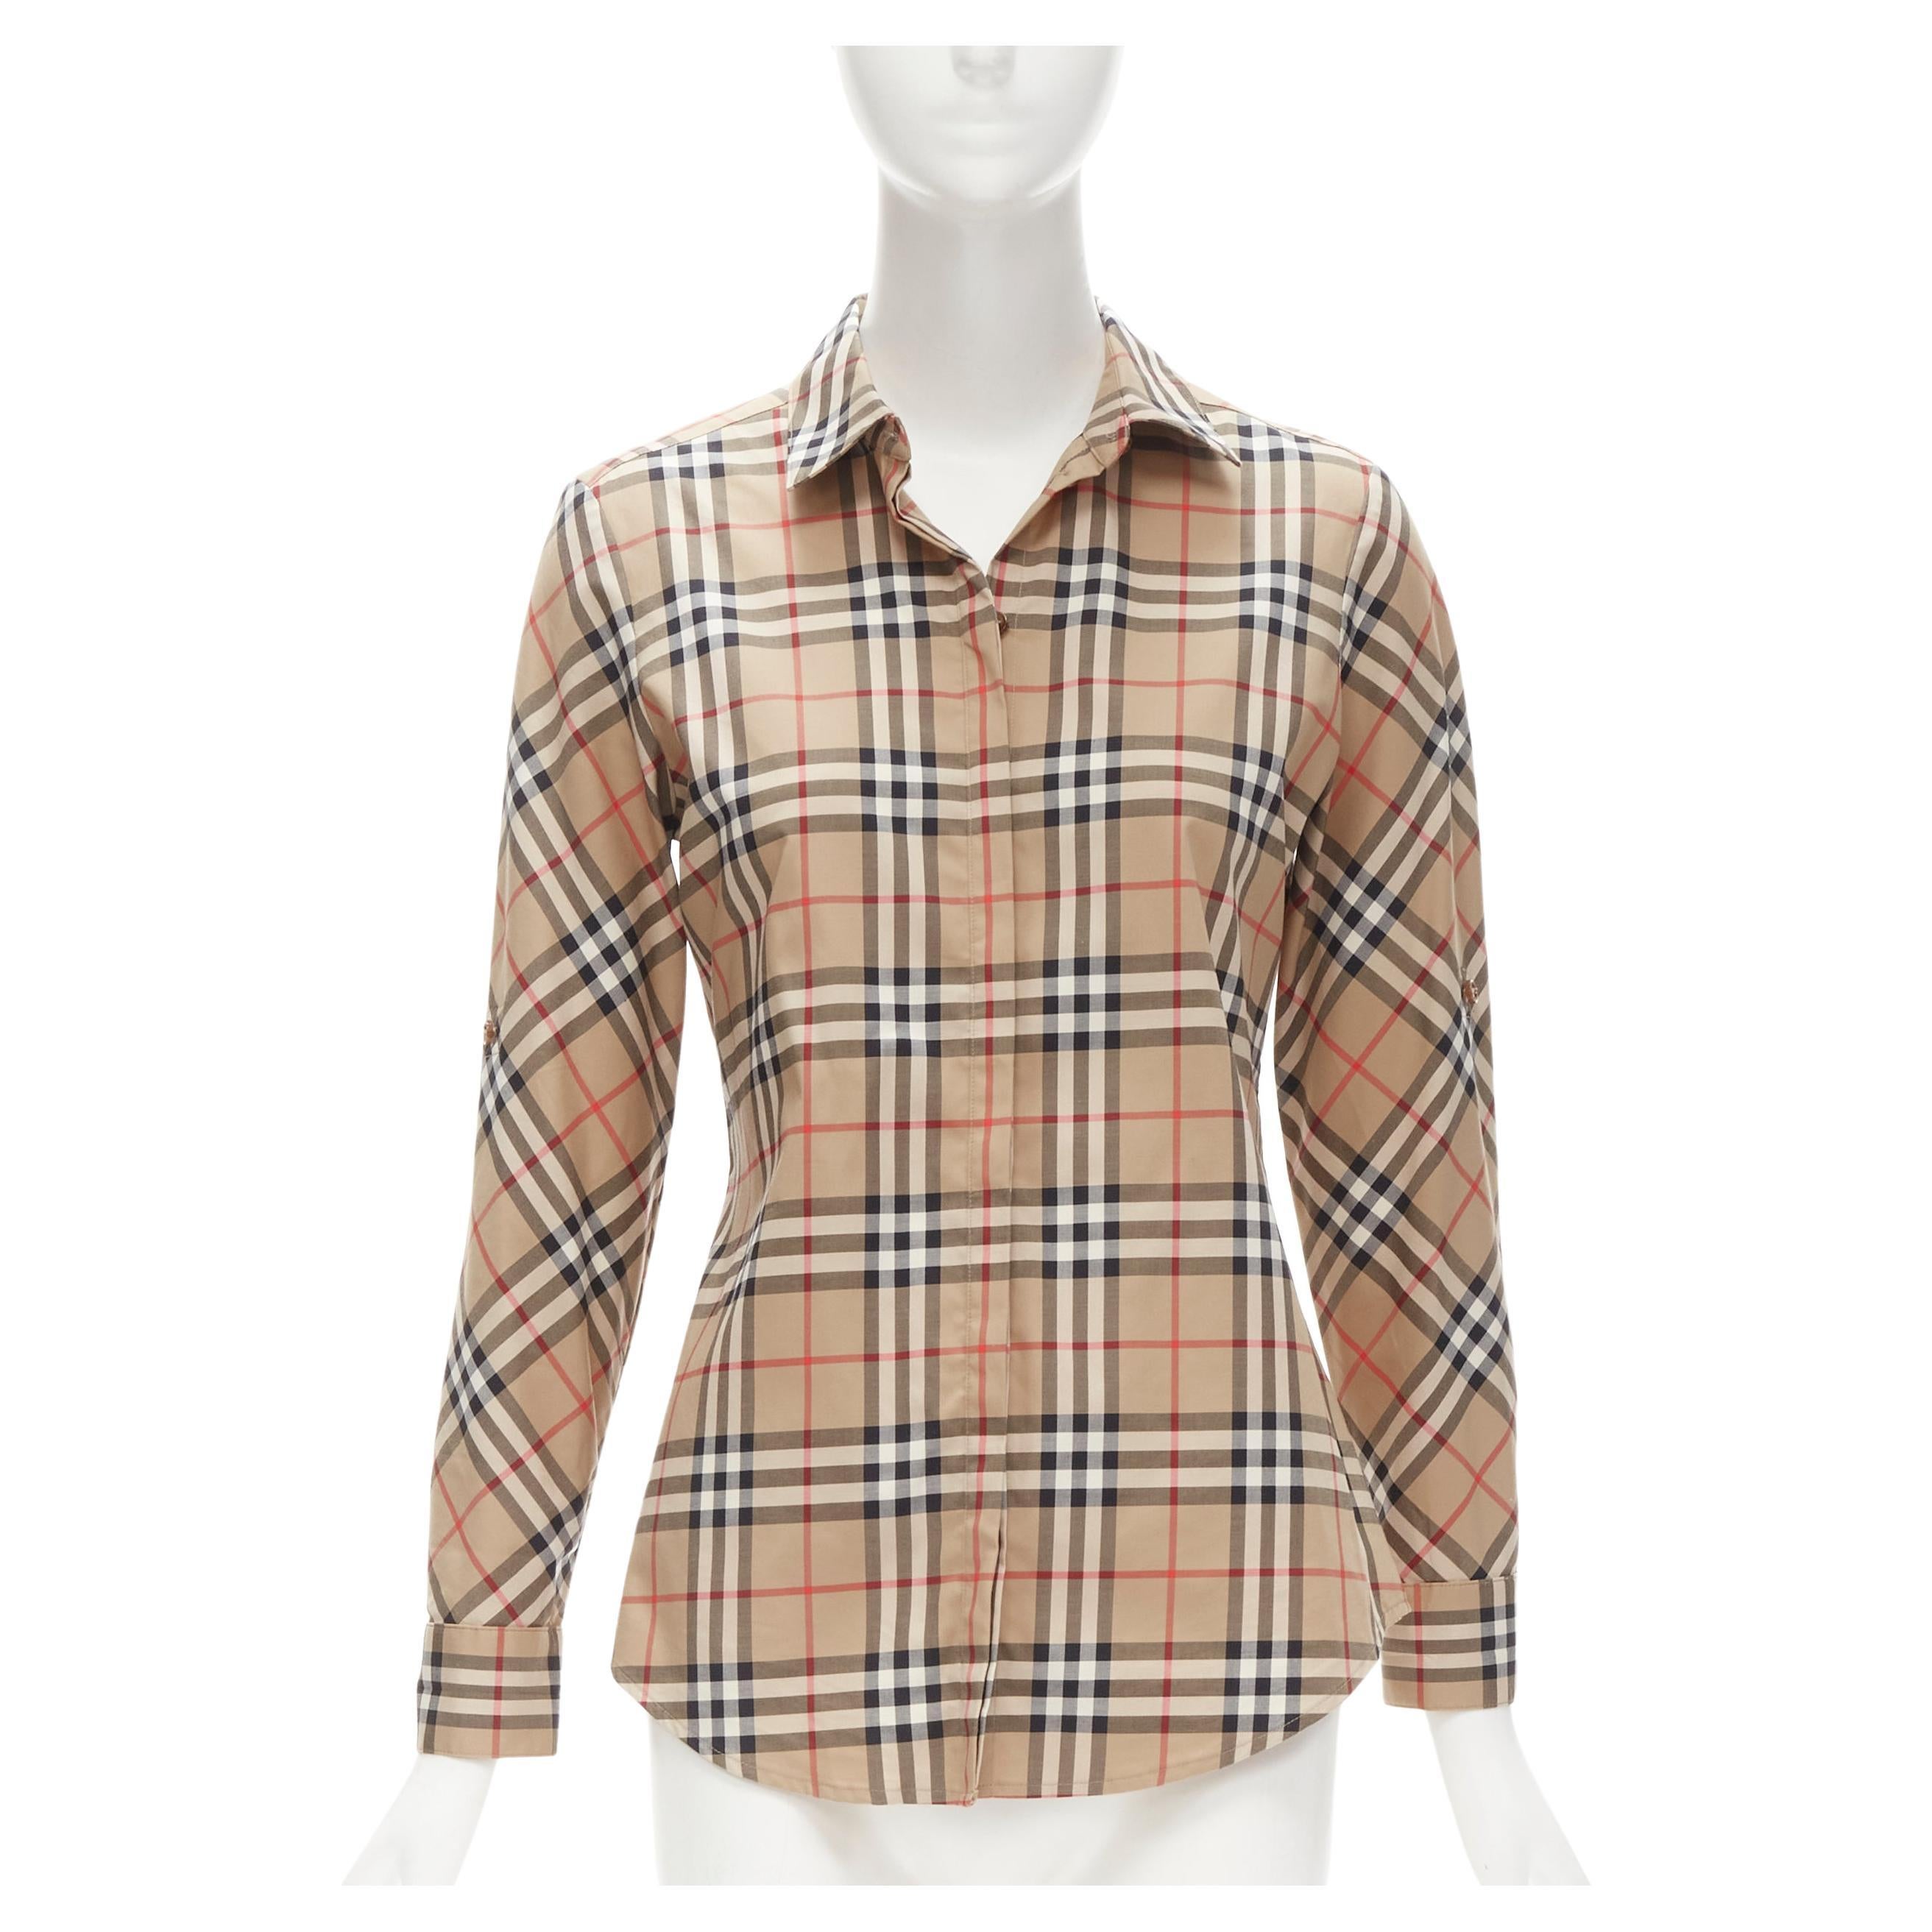 BURBERRY Signature House Check slim fit cotton long sleeve shirt XS